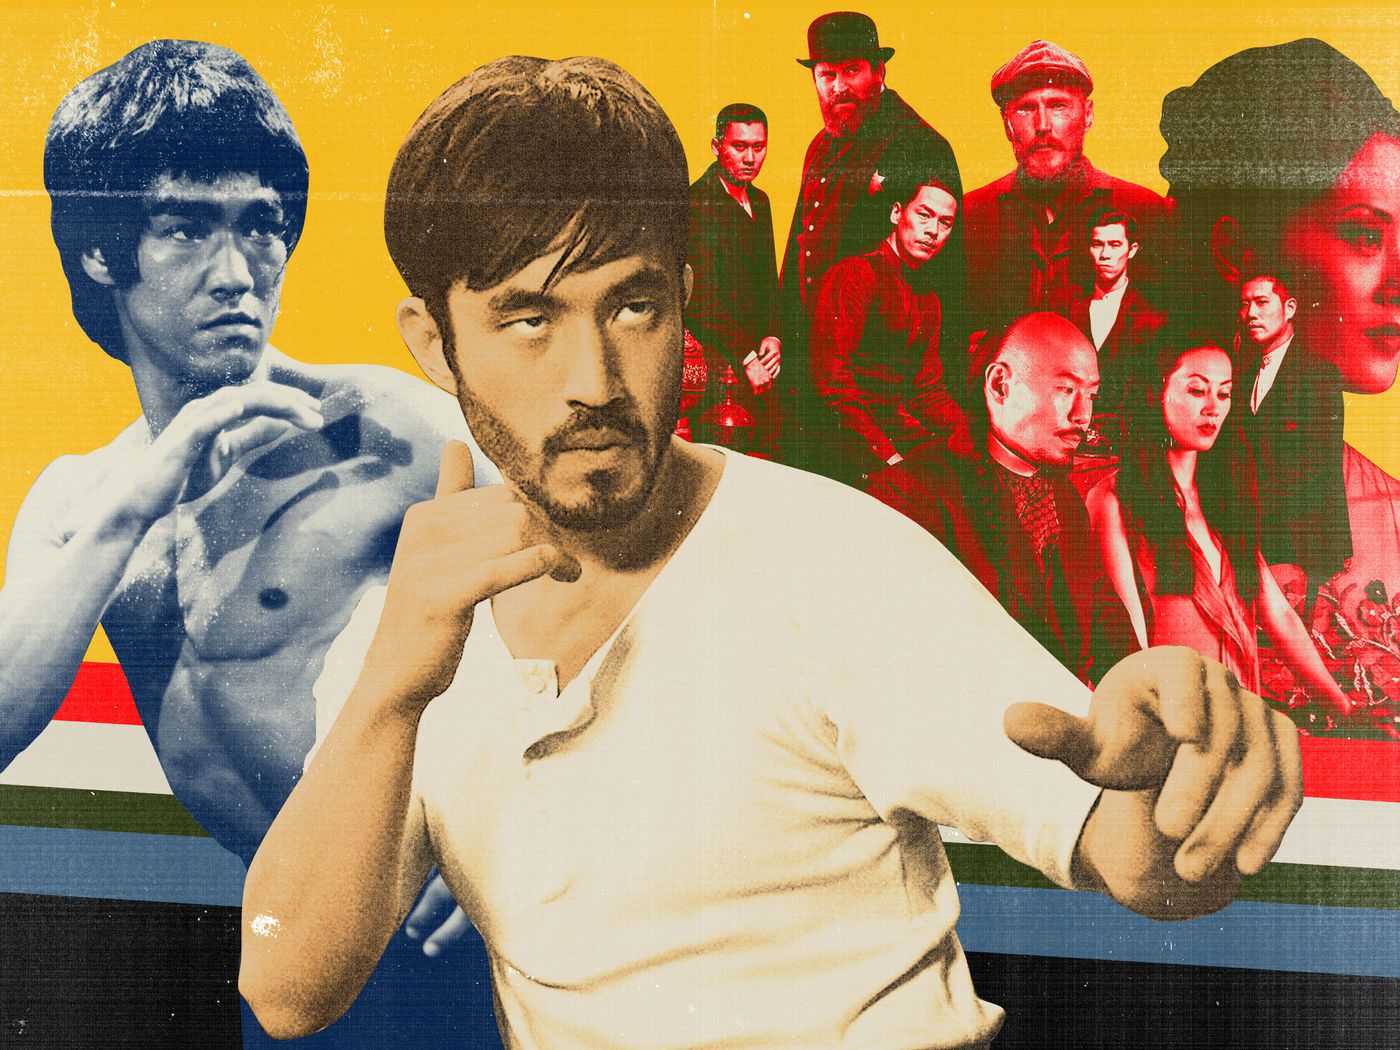 Finishing the Game: The Search for a New Bruce Lee